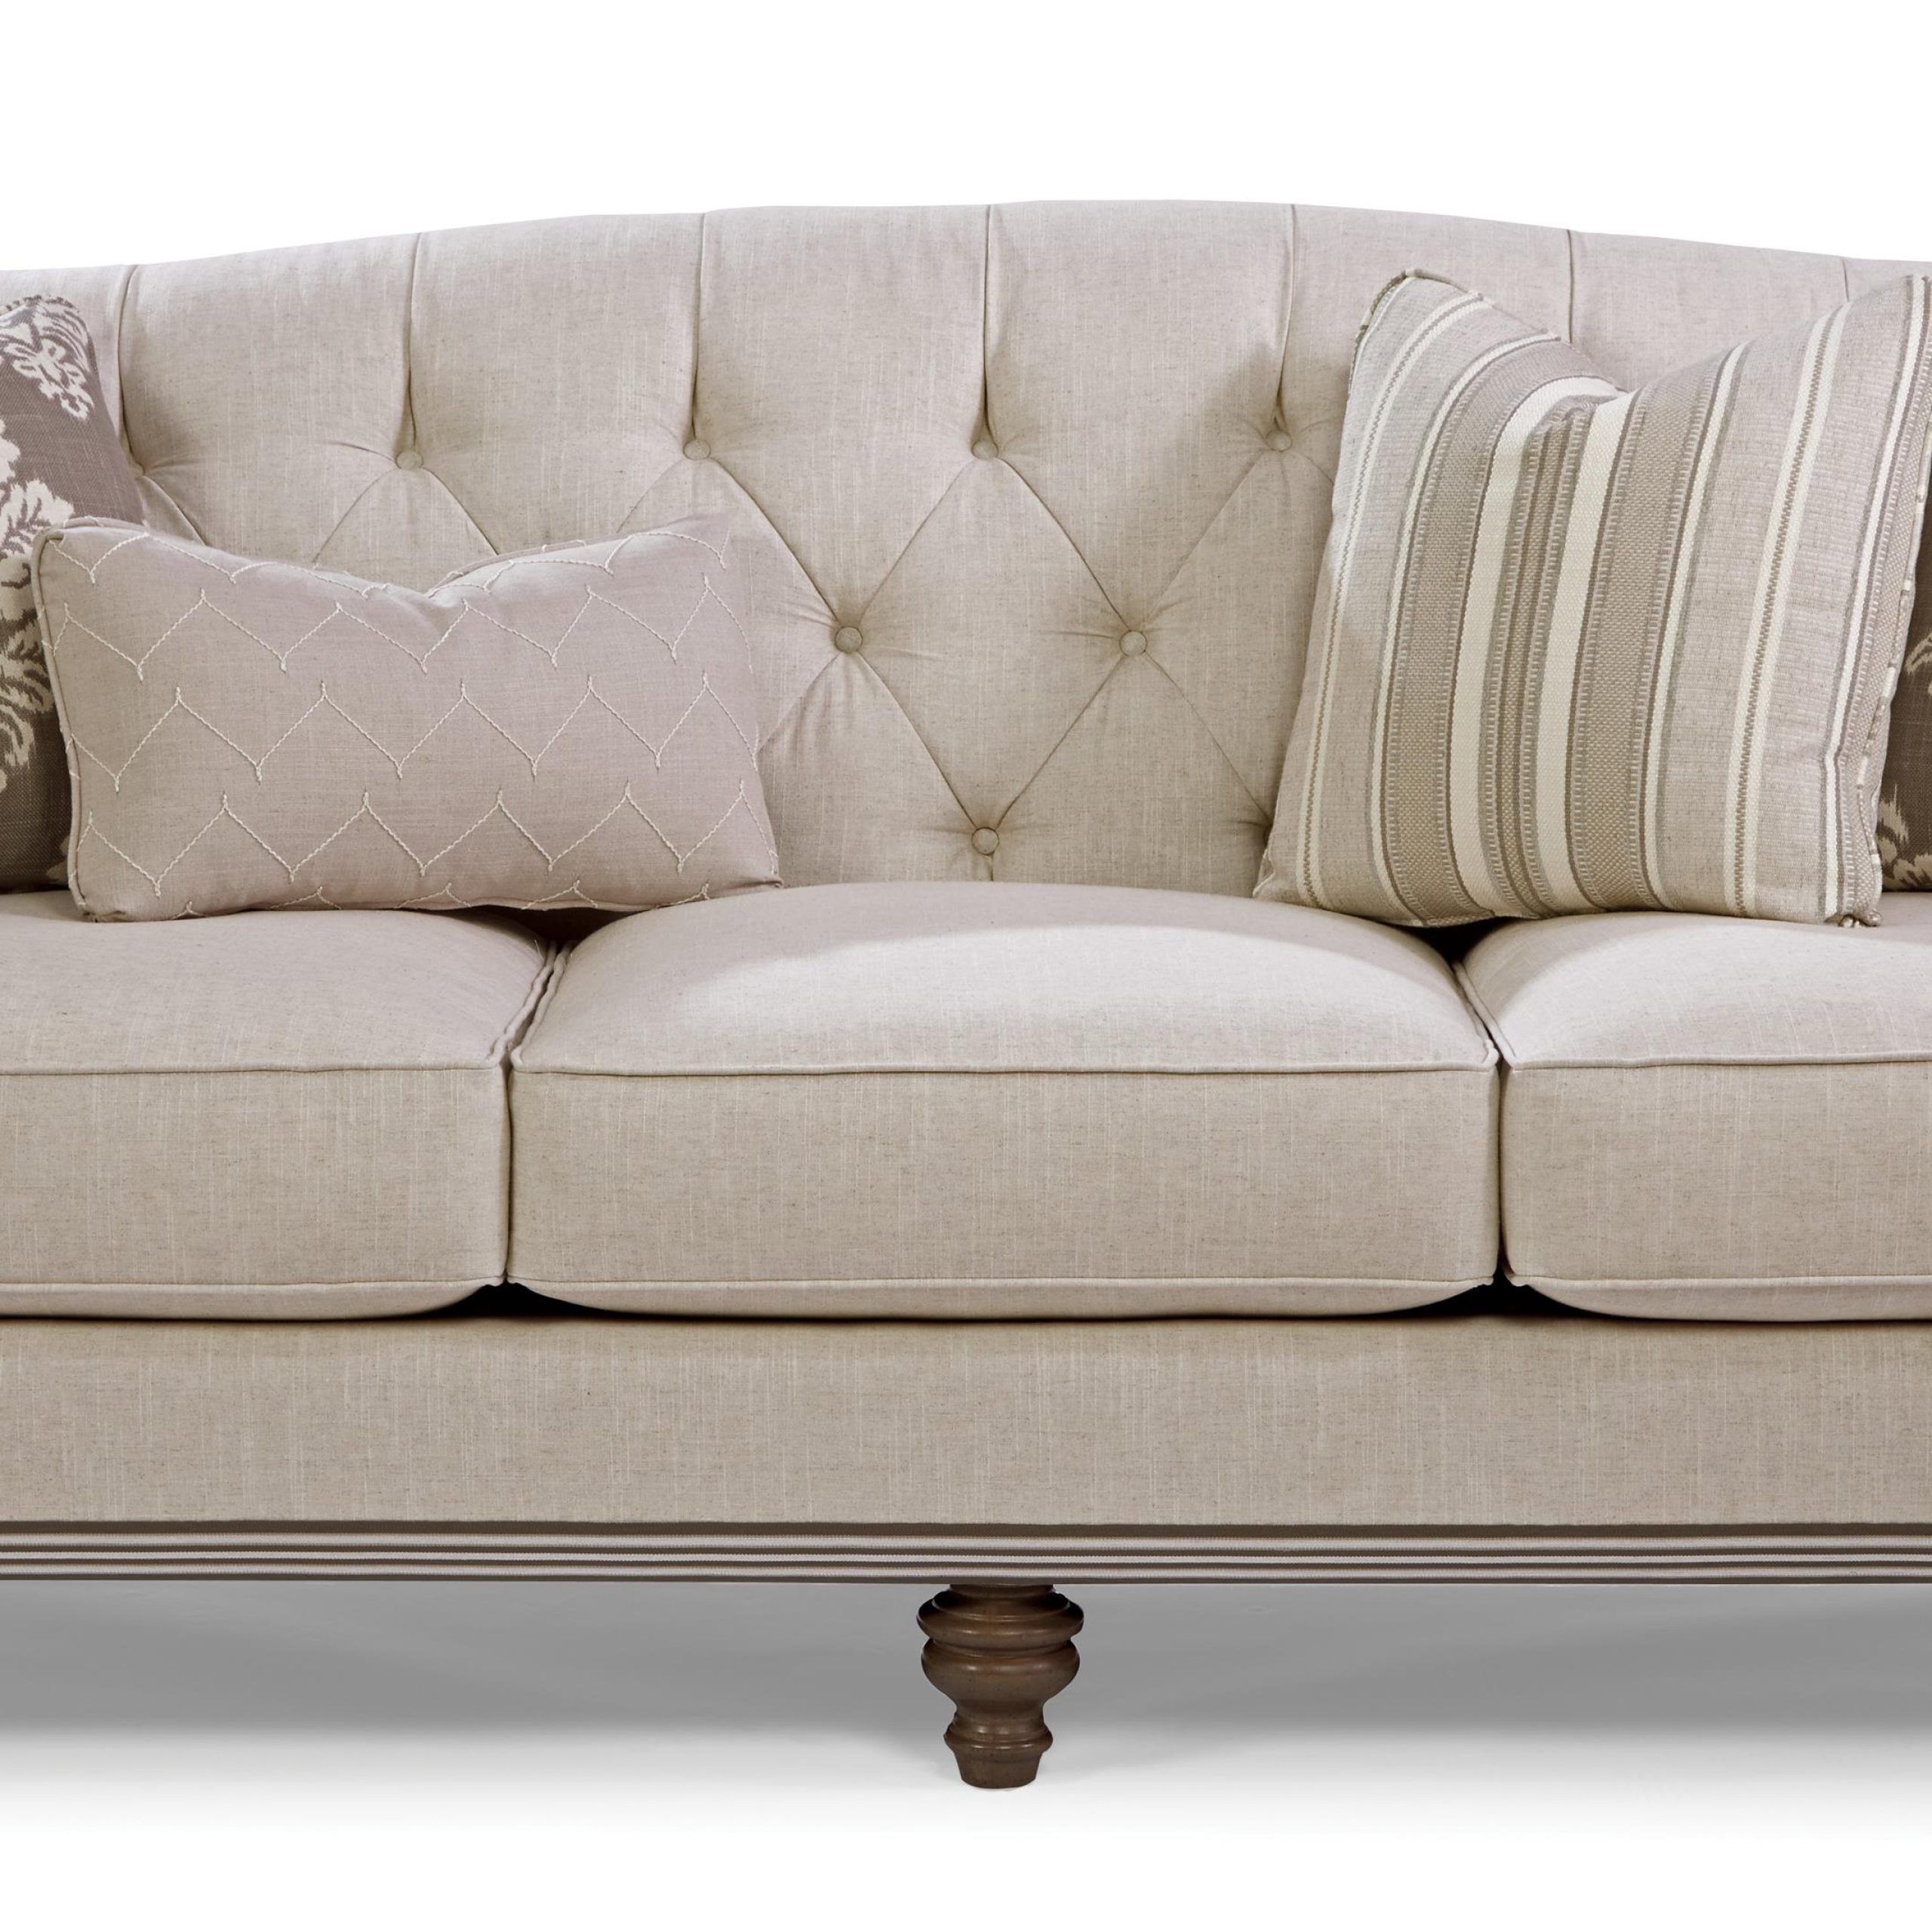 Well Liked Paula Deencraftmaster P744900 P744950bd Traditional Tufted Back Pertaining To Tufted Upholstered Sofas (View 11 of 15)